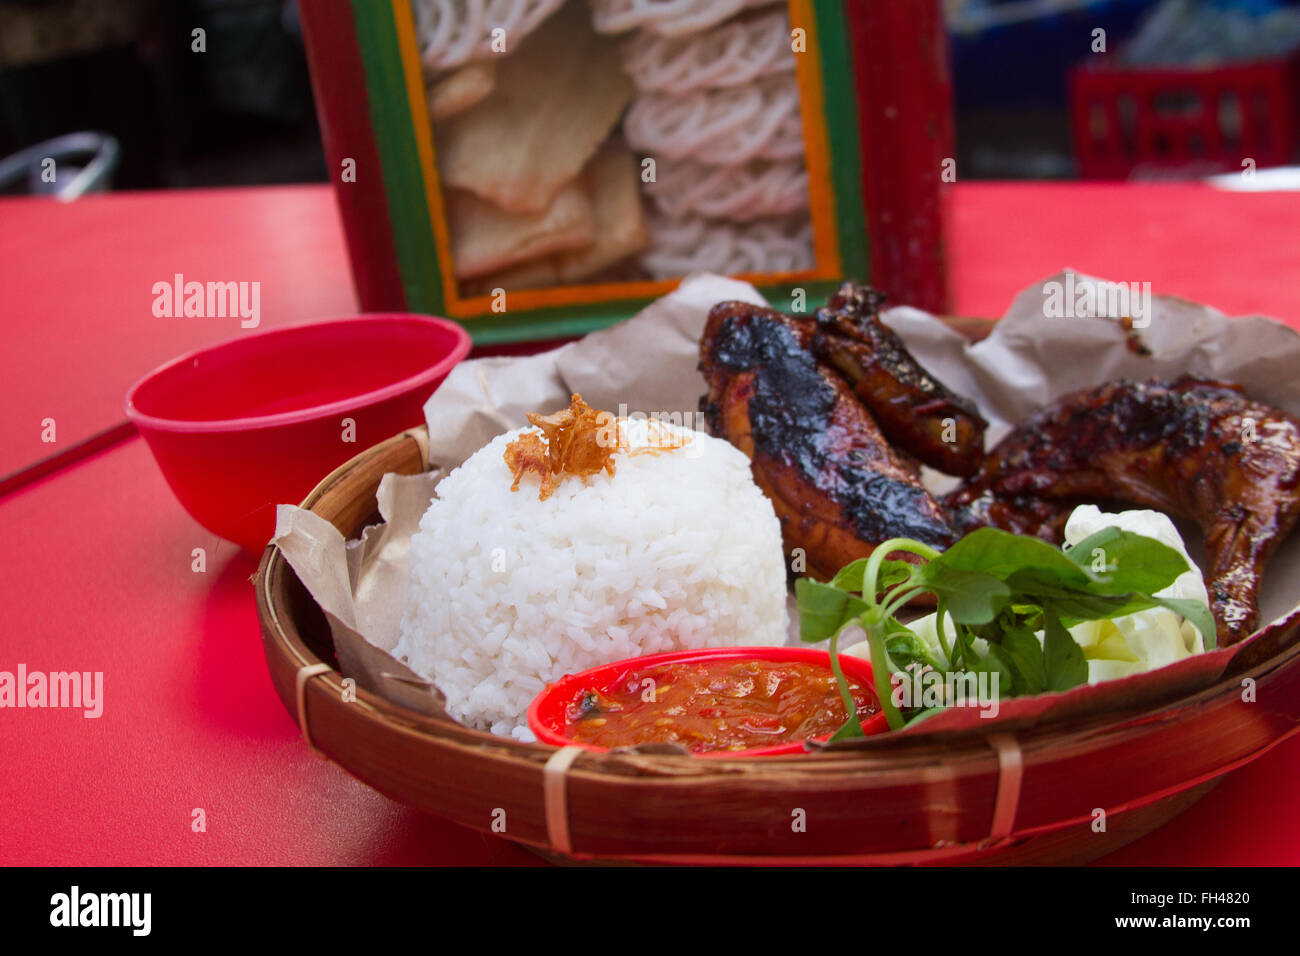 Street food along the streets of Jakarta, rice, grilled chicken and vegetables Stock Photo